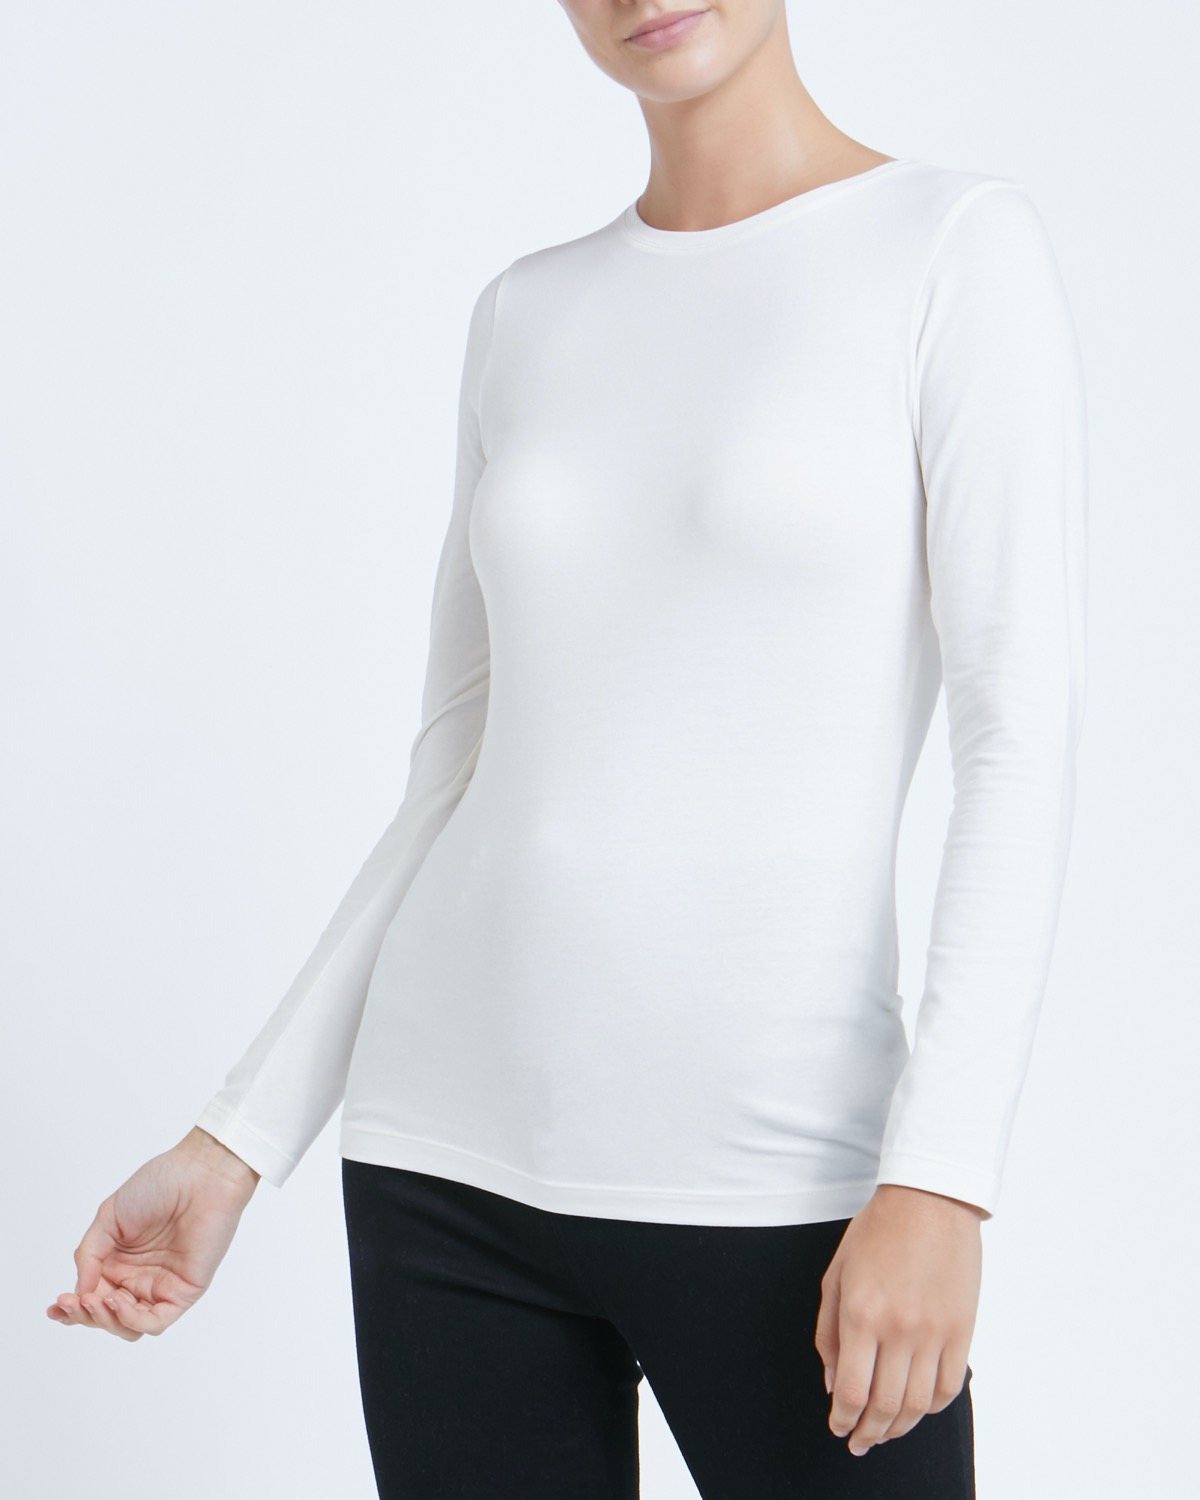 Dunnes Stores Winter White Long Sleeve Stretch Crew Neck Top